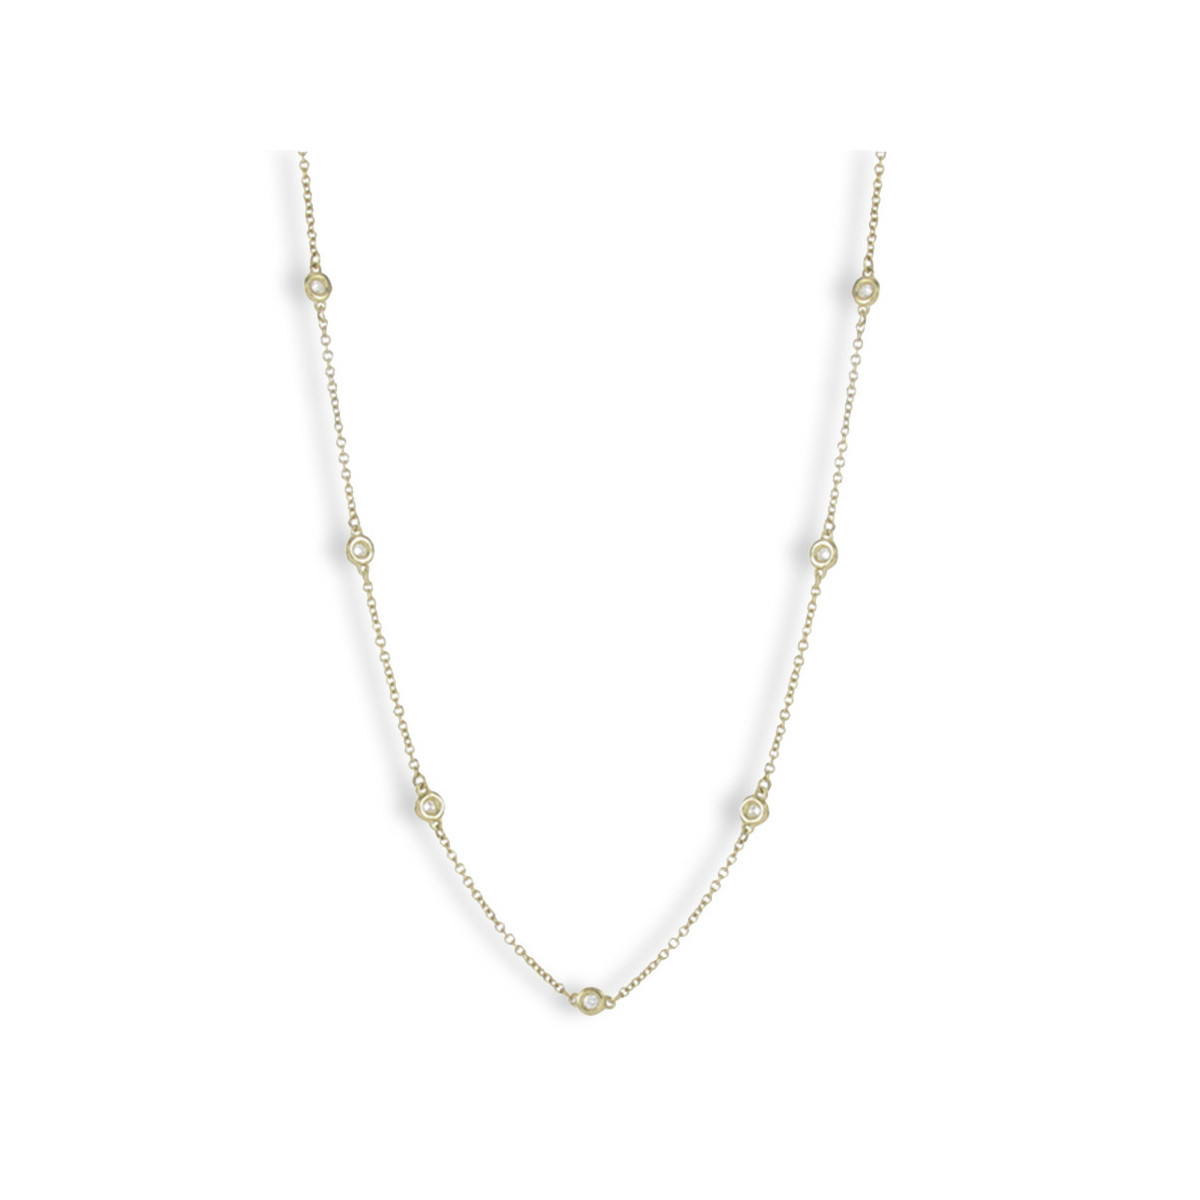 NECKLACE 42 CENTIMETERS GOLD AND DIAMONDS